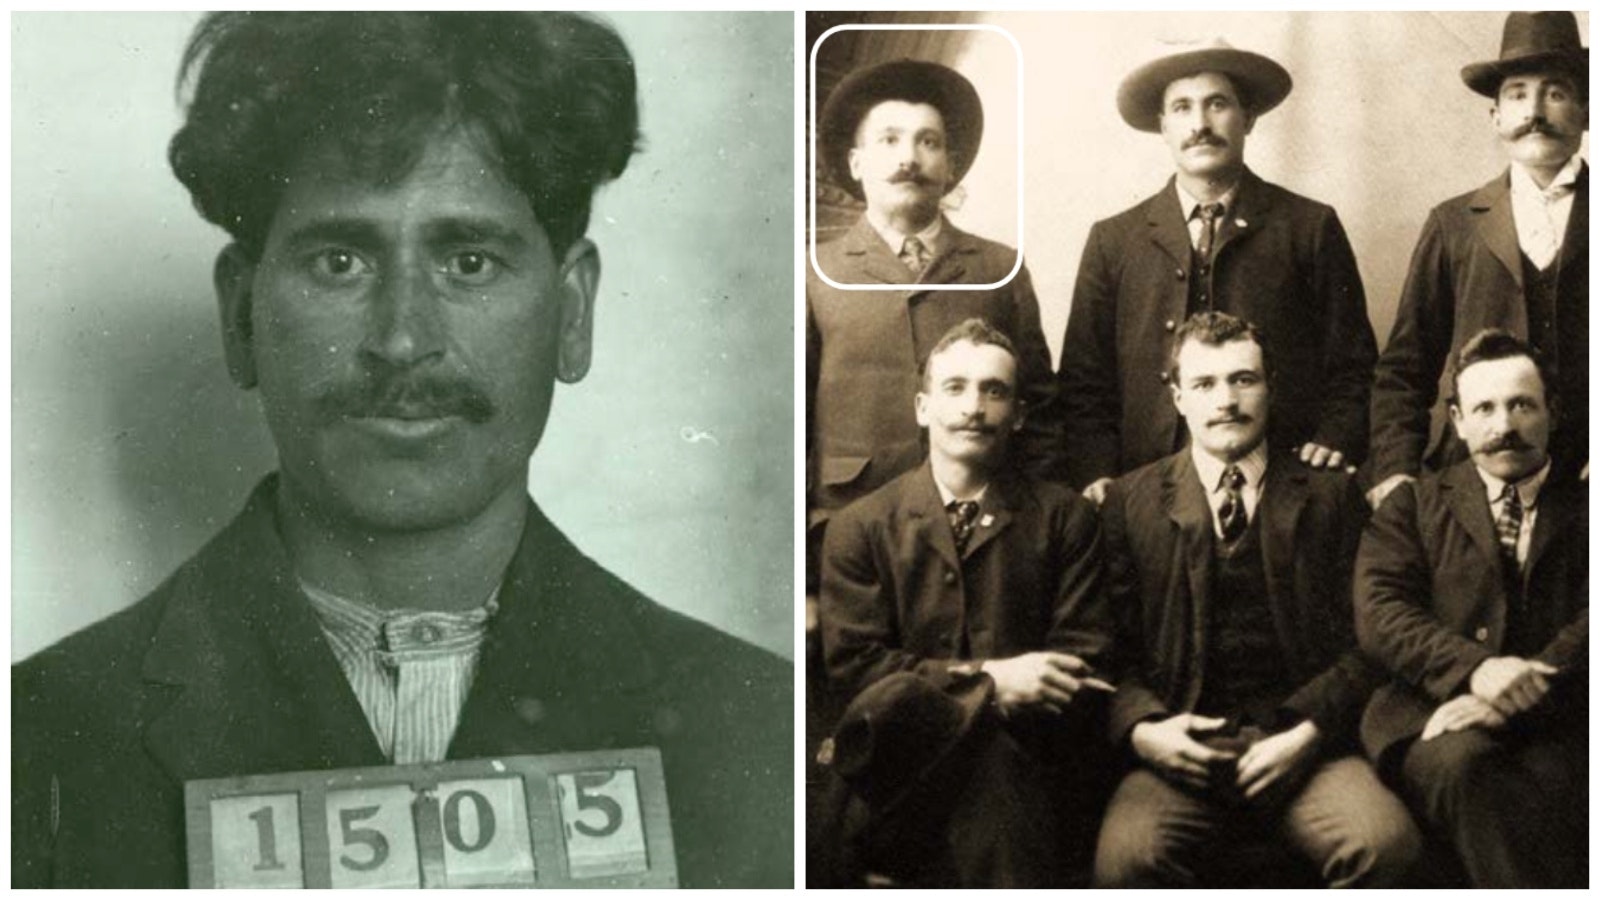 Gus Panos, a Greek immigrant, left, who was convicted of shooting Riccardo Severini while drunk. Right, officers of the Dante Alighieri Society. Riccardo Severini is in the upper left corner.